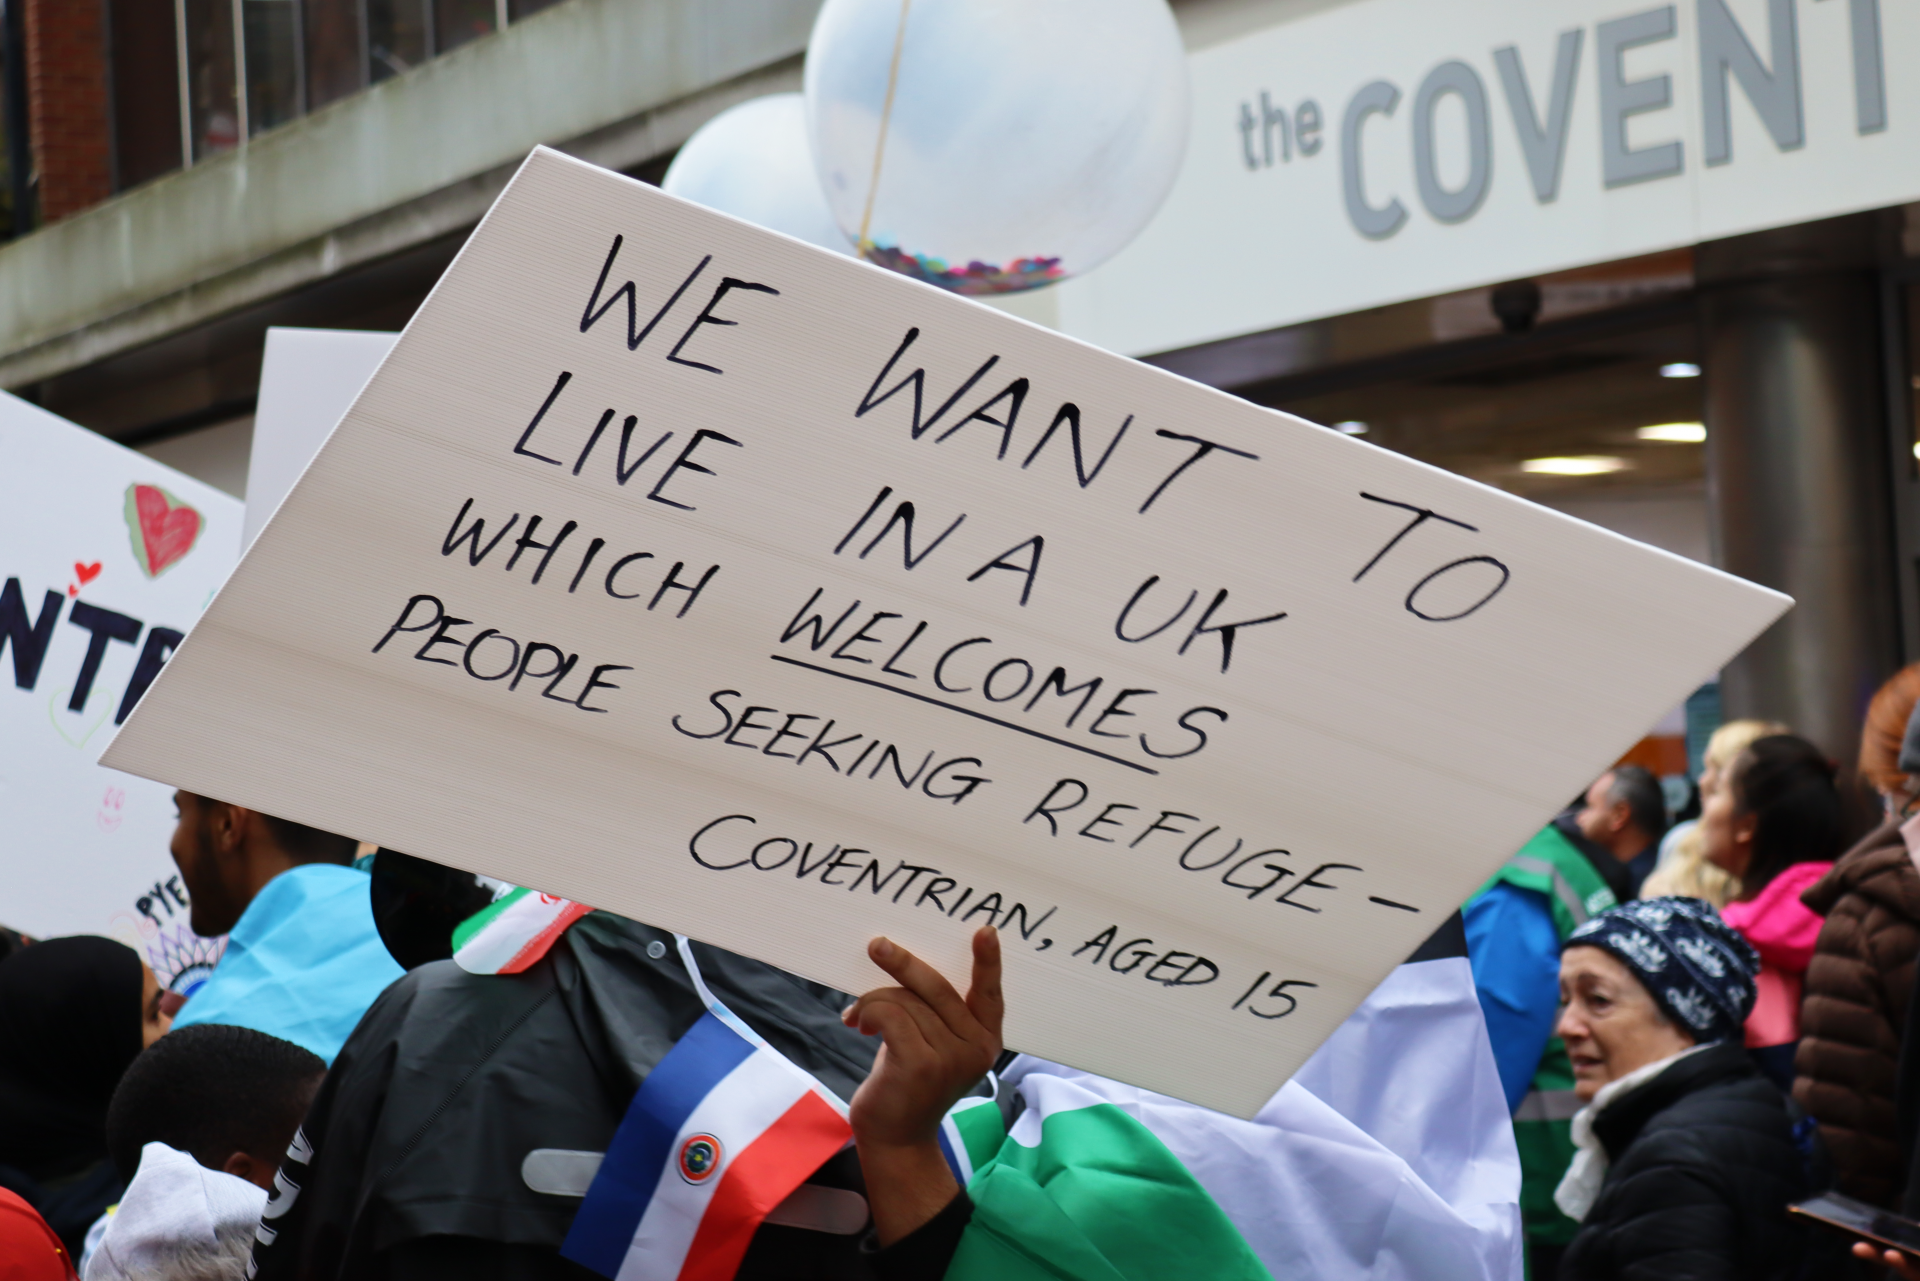 We want to live in a UK which welcomes people seeking refuge